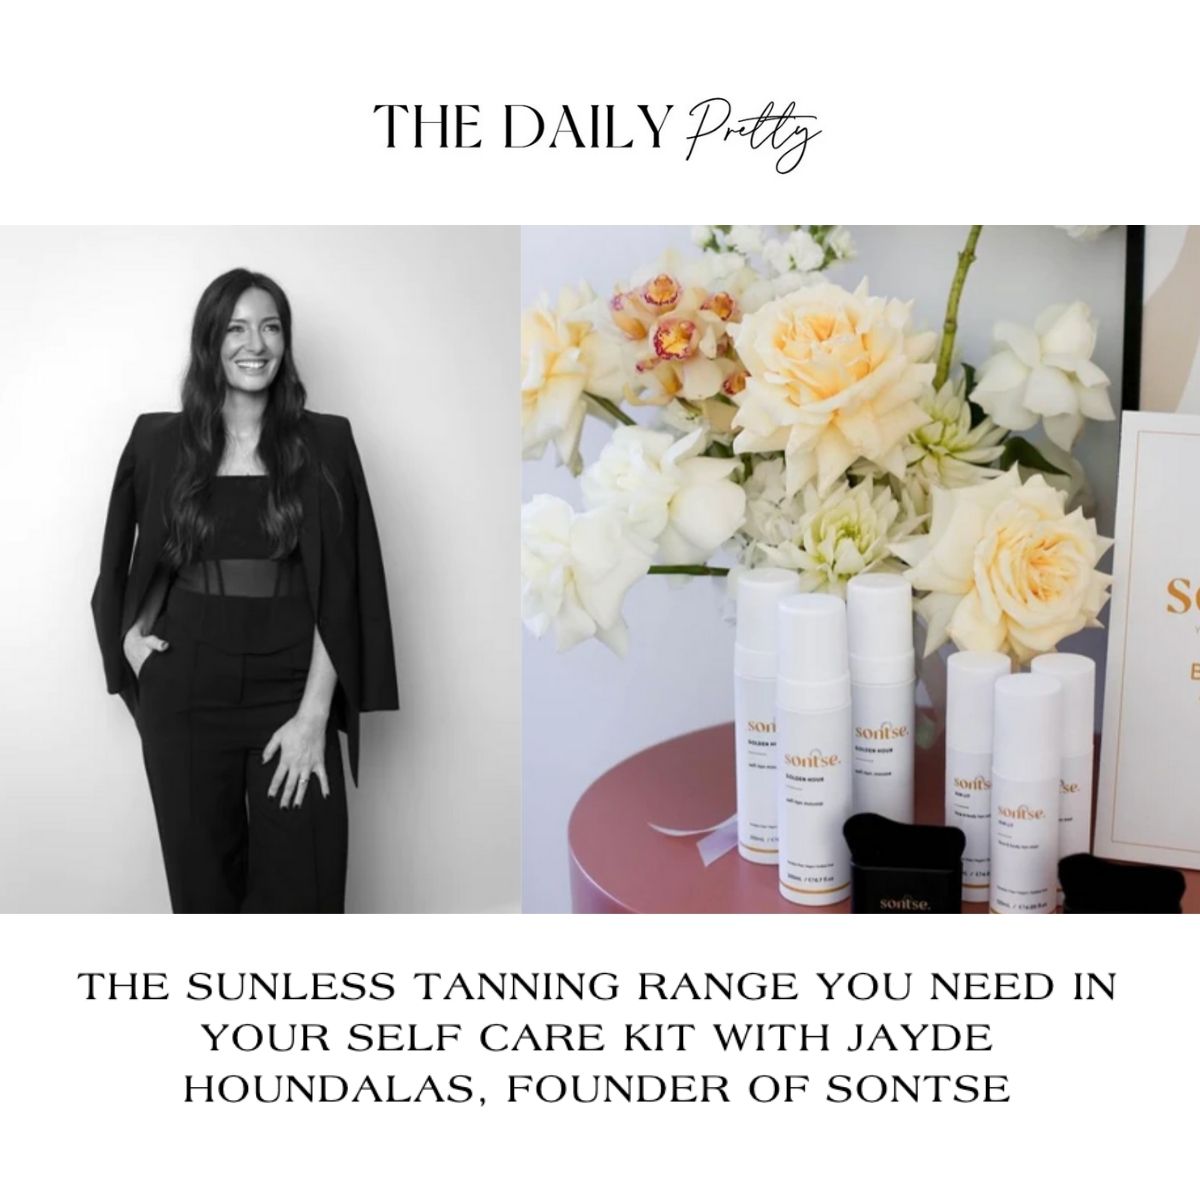 The Sunless Tanning Range you need in your Self Care Kit